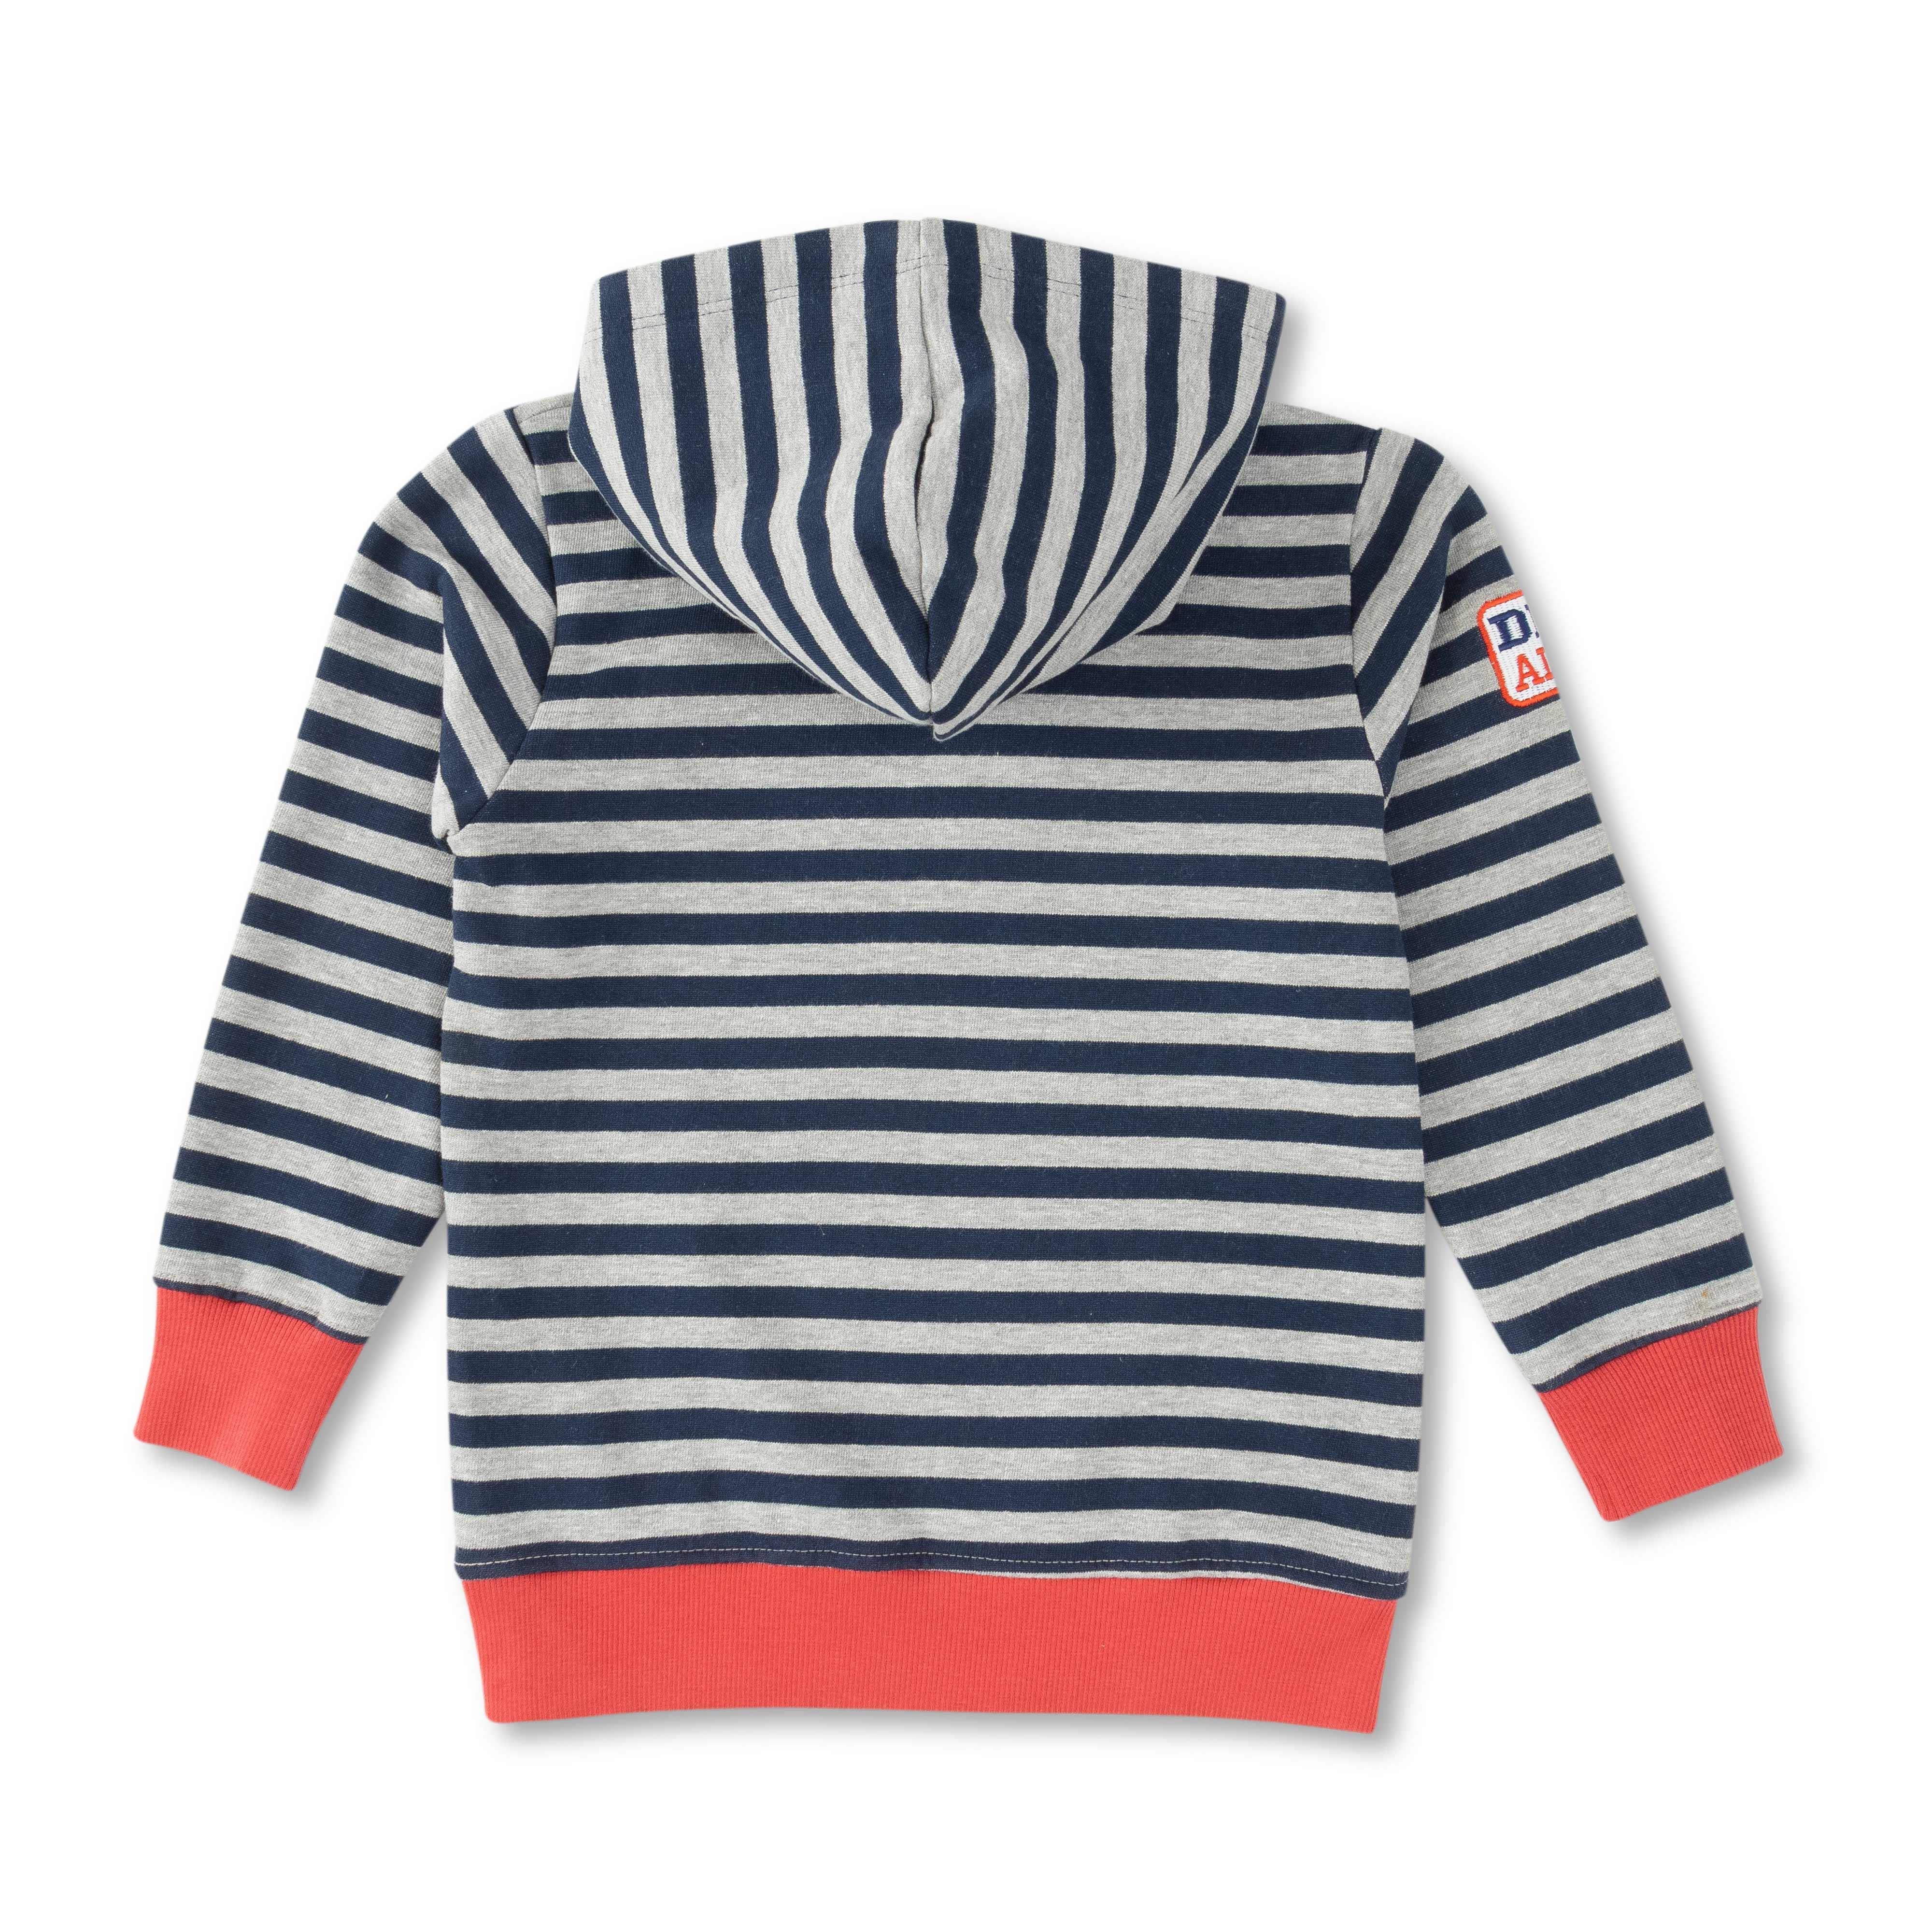 Young Boys Striped Road Trips Bus Embroidery Hoody - Juscubs